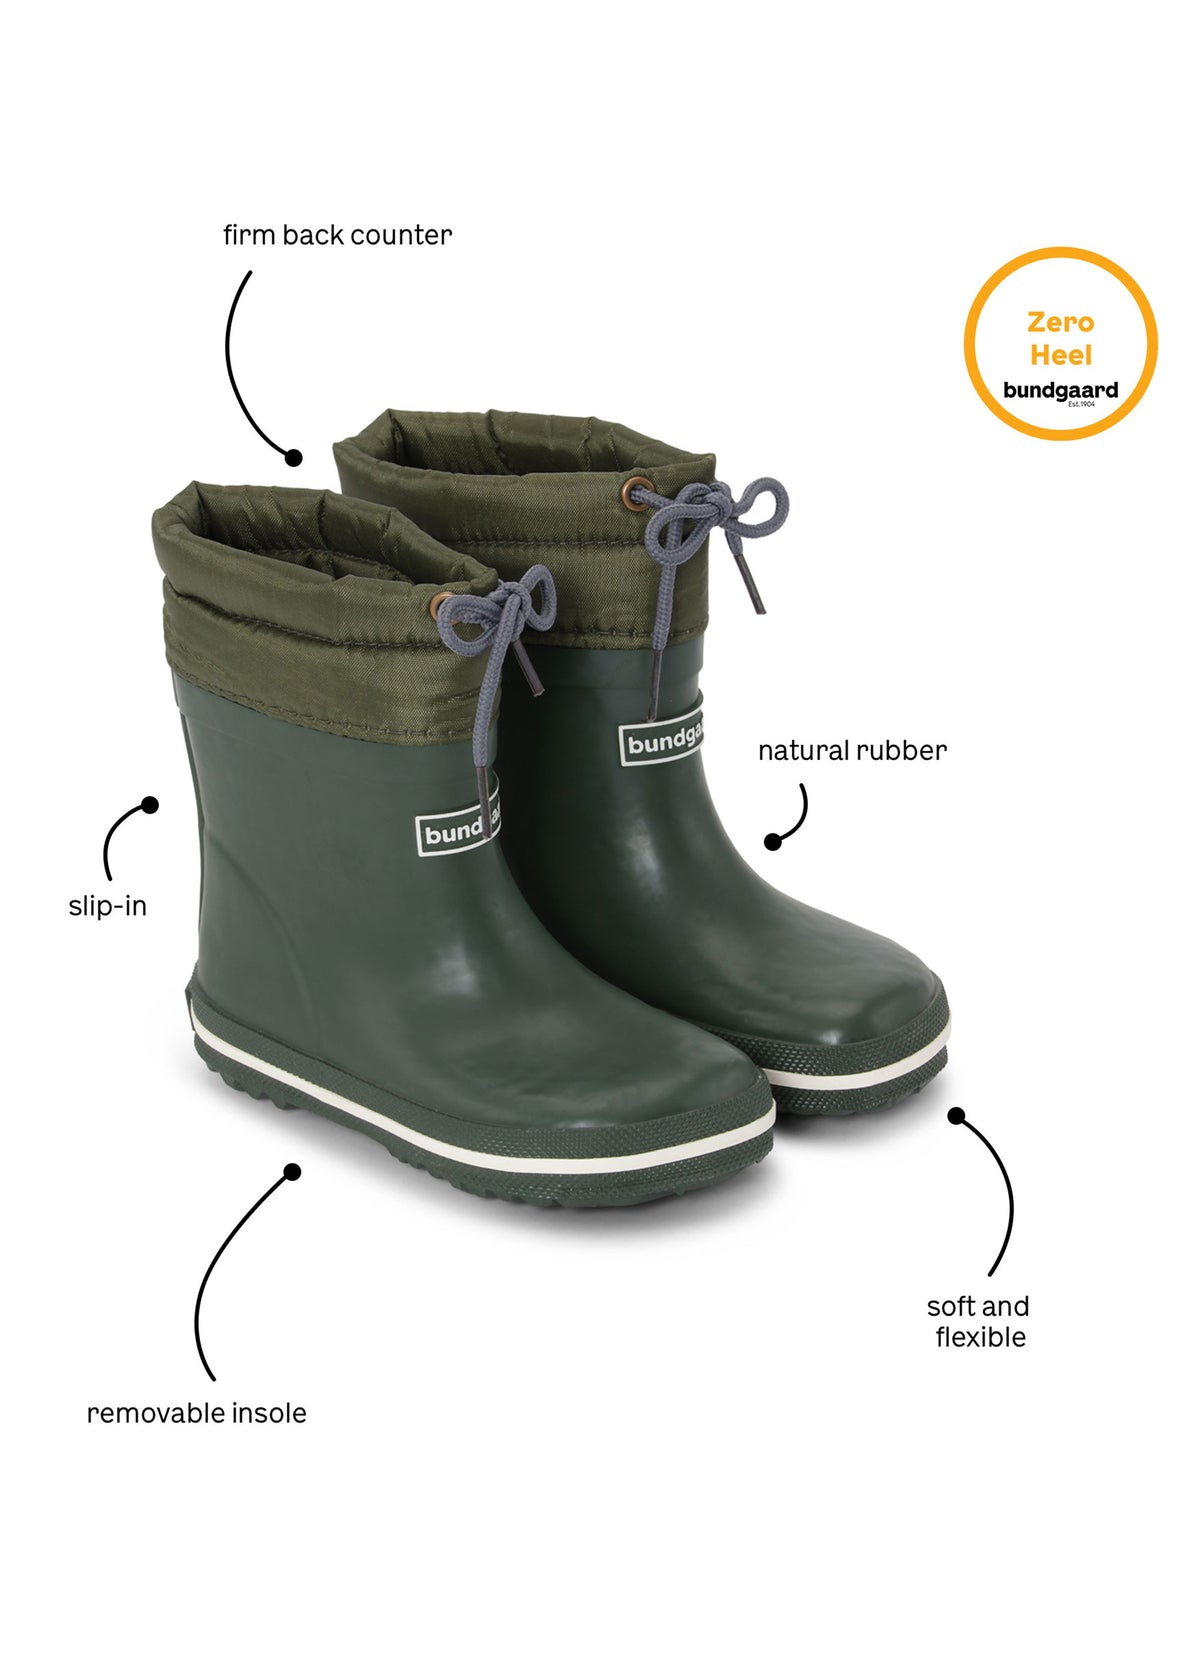 Rubber boots with a warm lining - dark green, short shaft, drawstrings, Cirro Low Warm